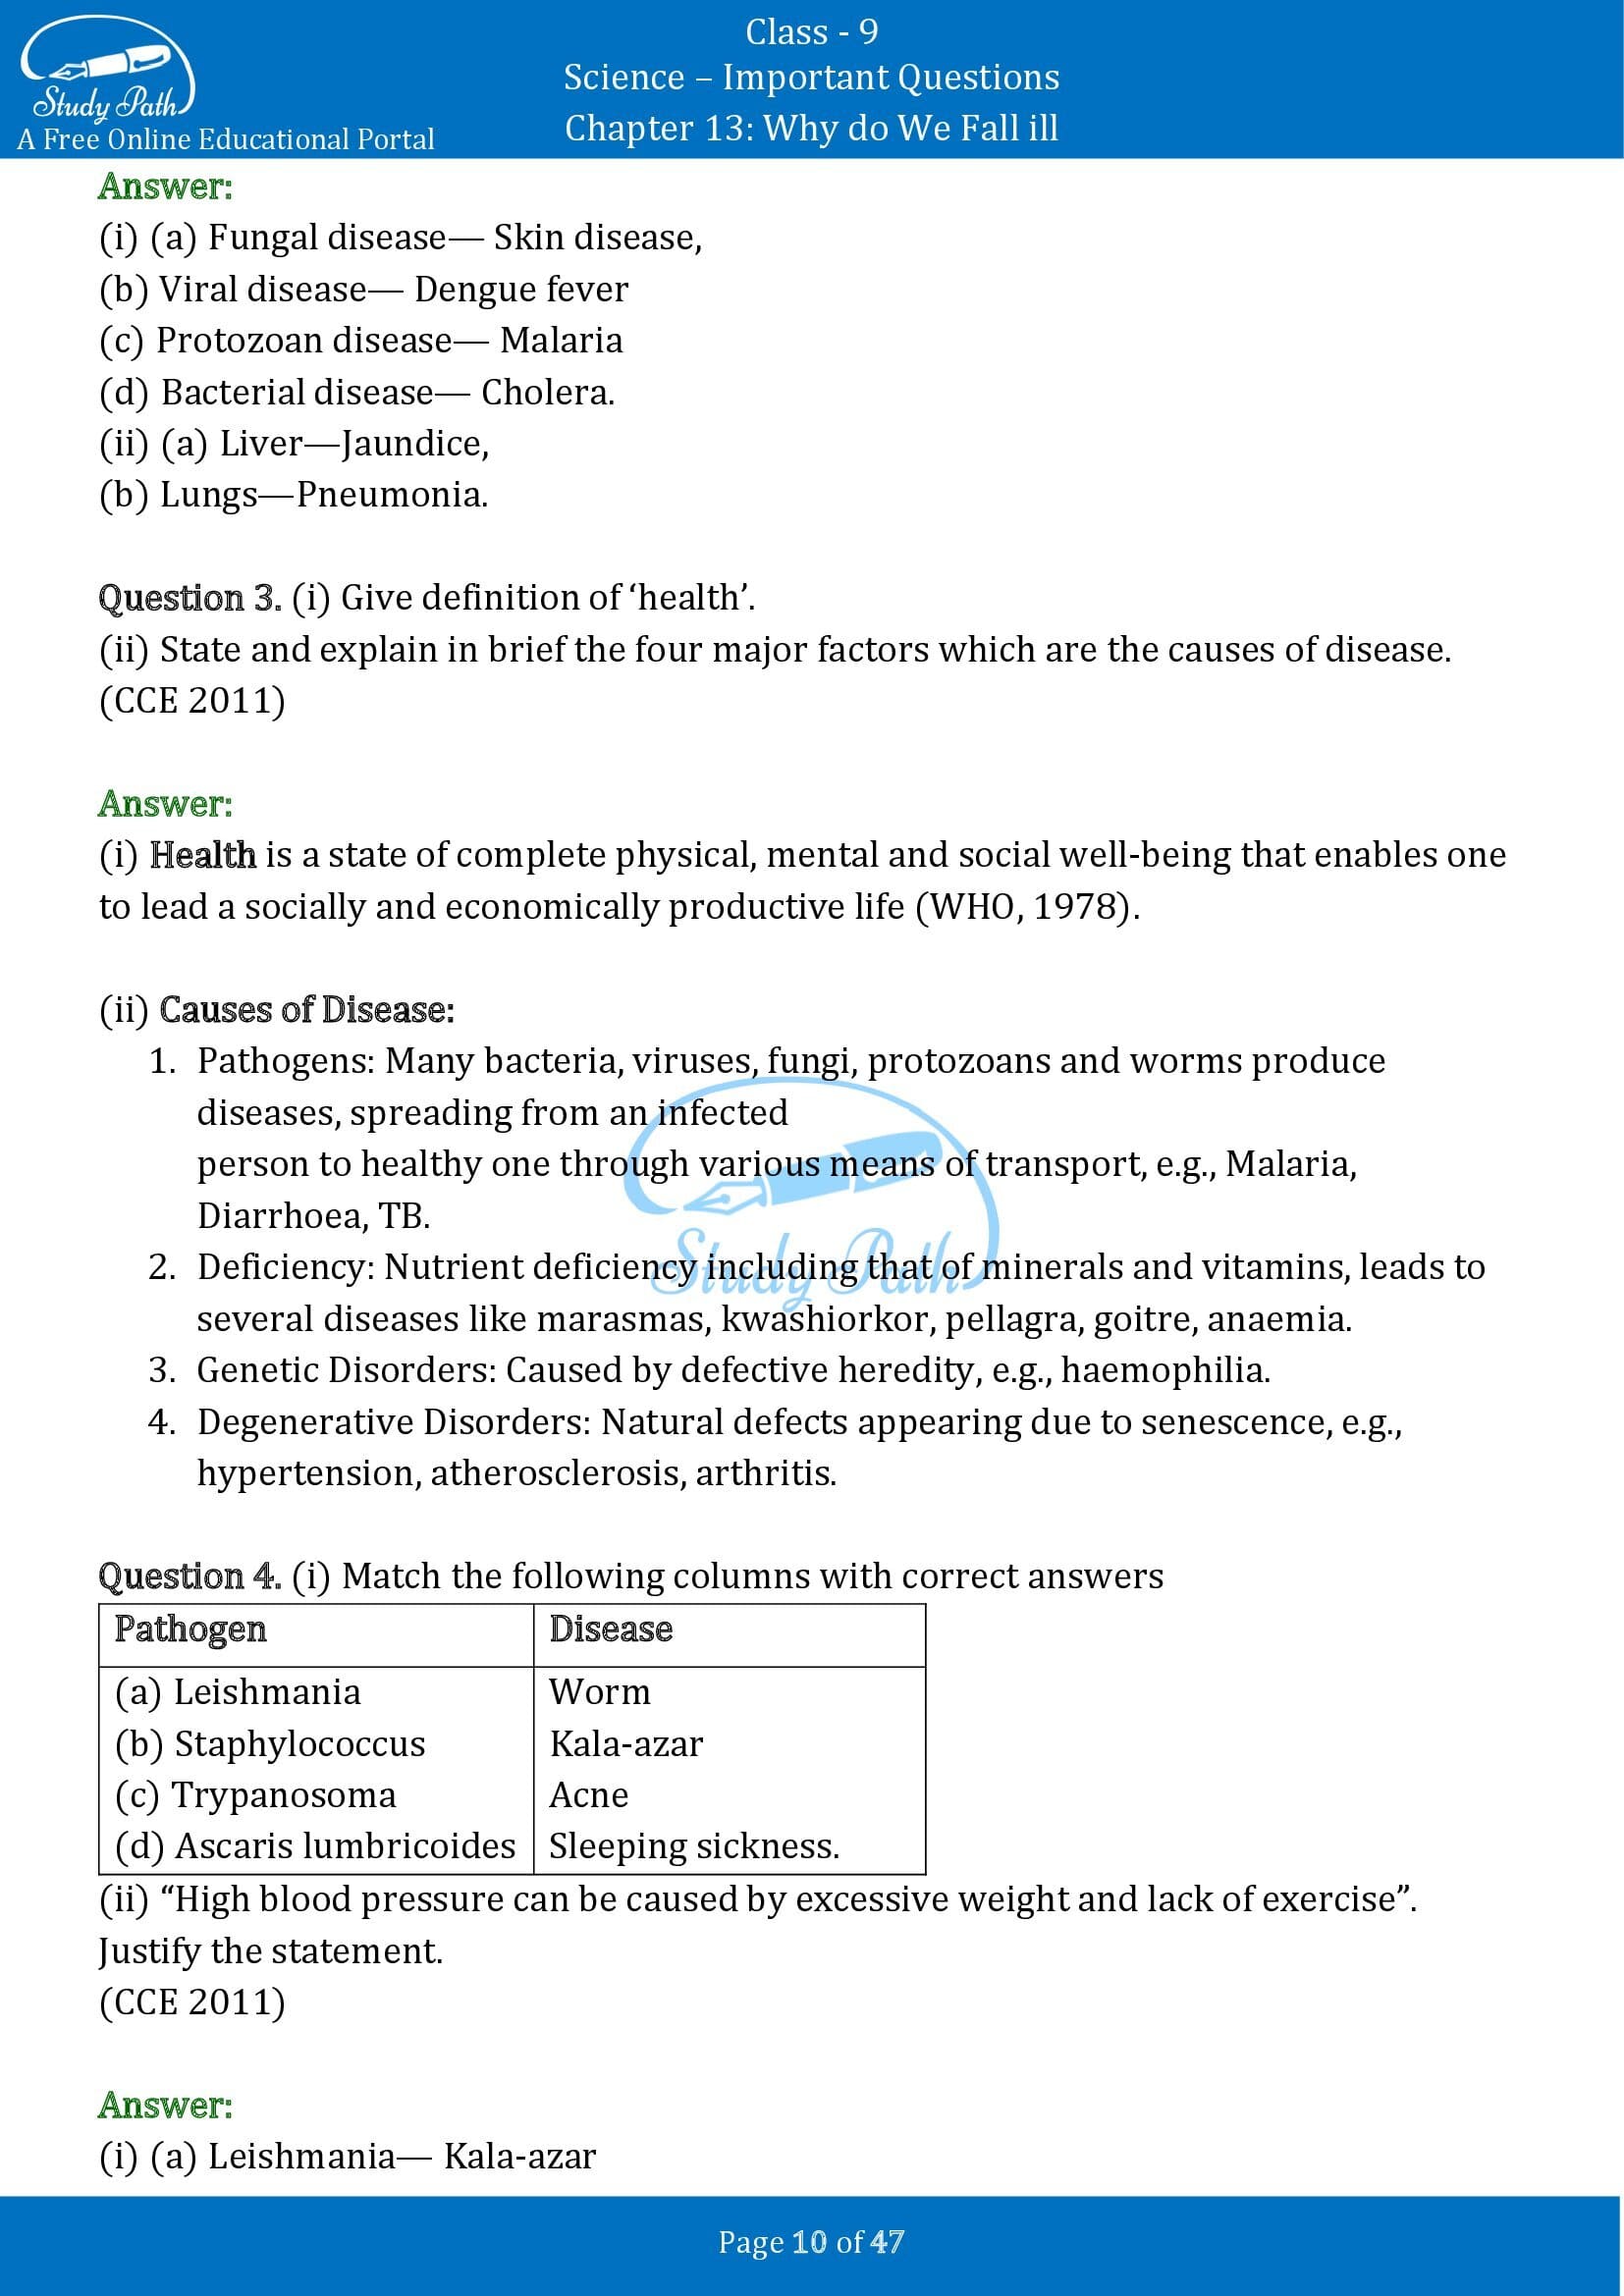 Important Questions for Class 9 Science Chapter 13 Why do We Fall ill 00010